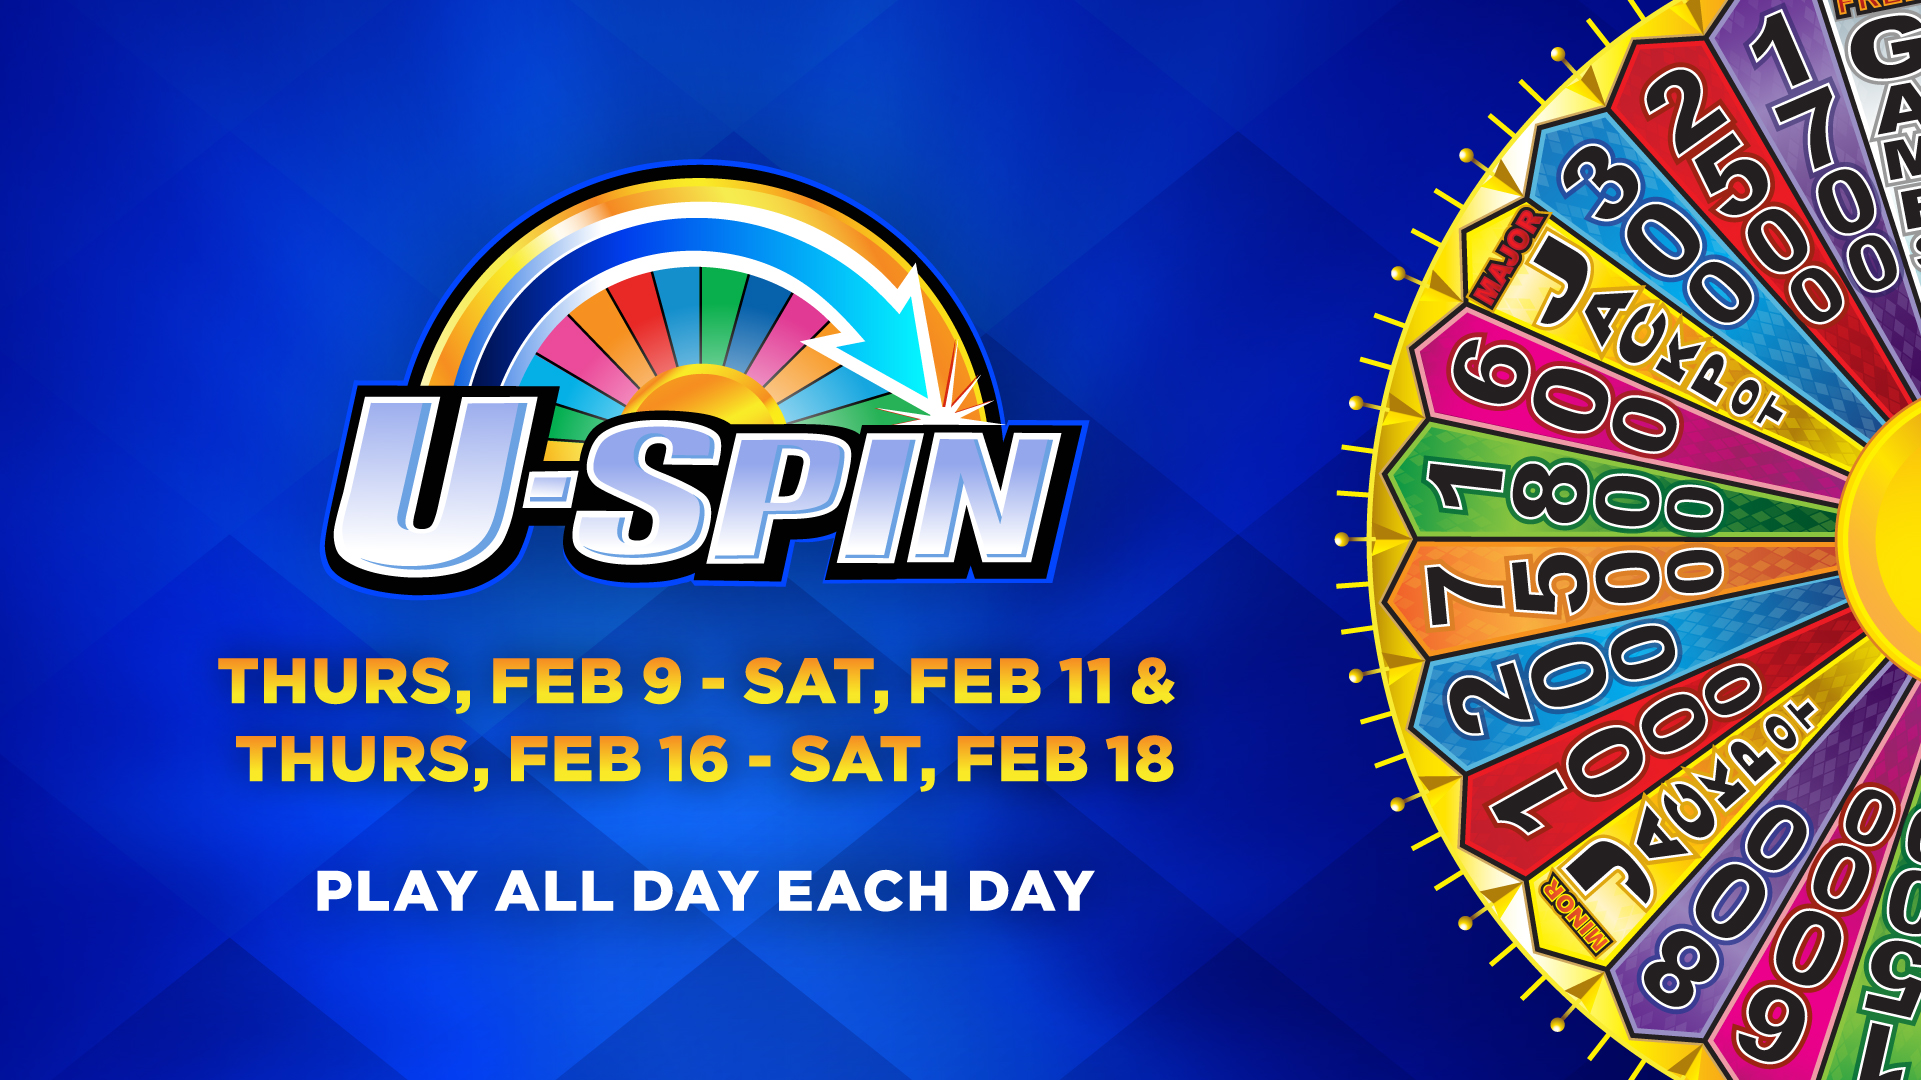 U-Spin Thurs, Feb 9 - Sat, Feb 11 & Thurs, Feb 16 - Sat, Feb 18 Play All Day Each Day Over $20,000 Given Away! How To Play 1. Play on any eligible slot machine 2. Fill up the Progress Bar. 3. Spin and Win! Maximum ten (10) spins per day.